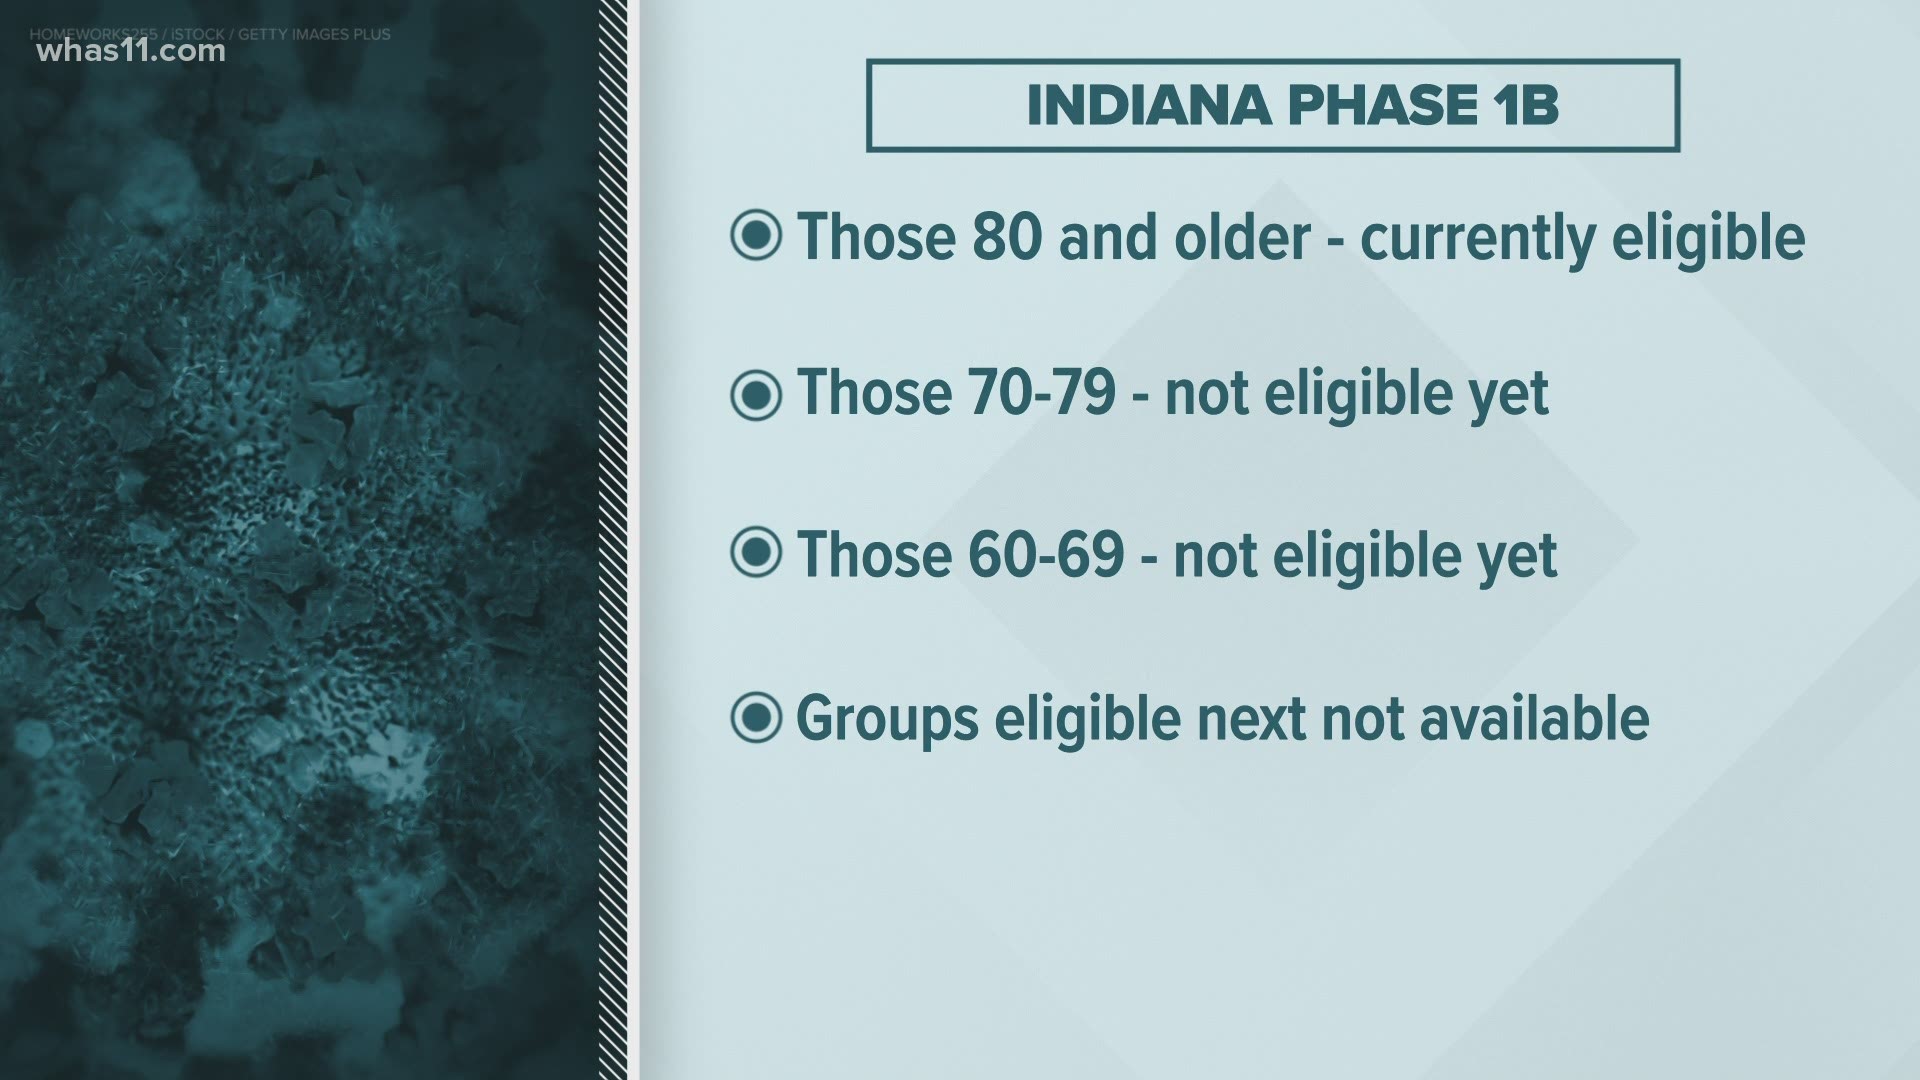 When will you be able to get your COVID-19 vaccine? Here's a breakdown of the timeline for Kentucky and Indiana.